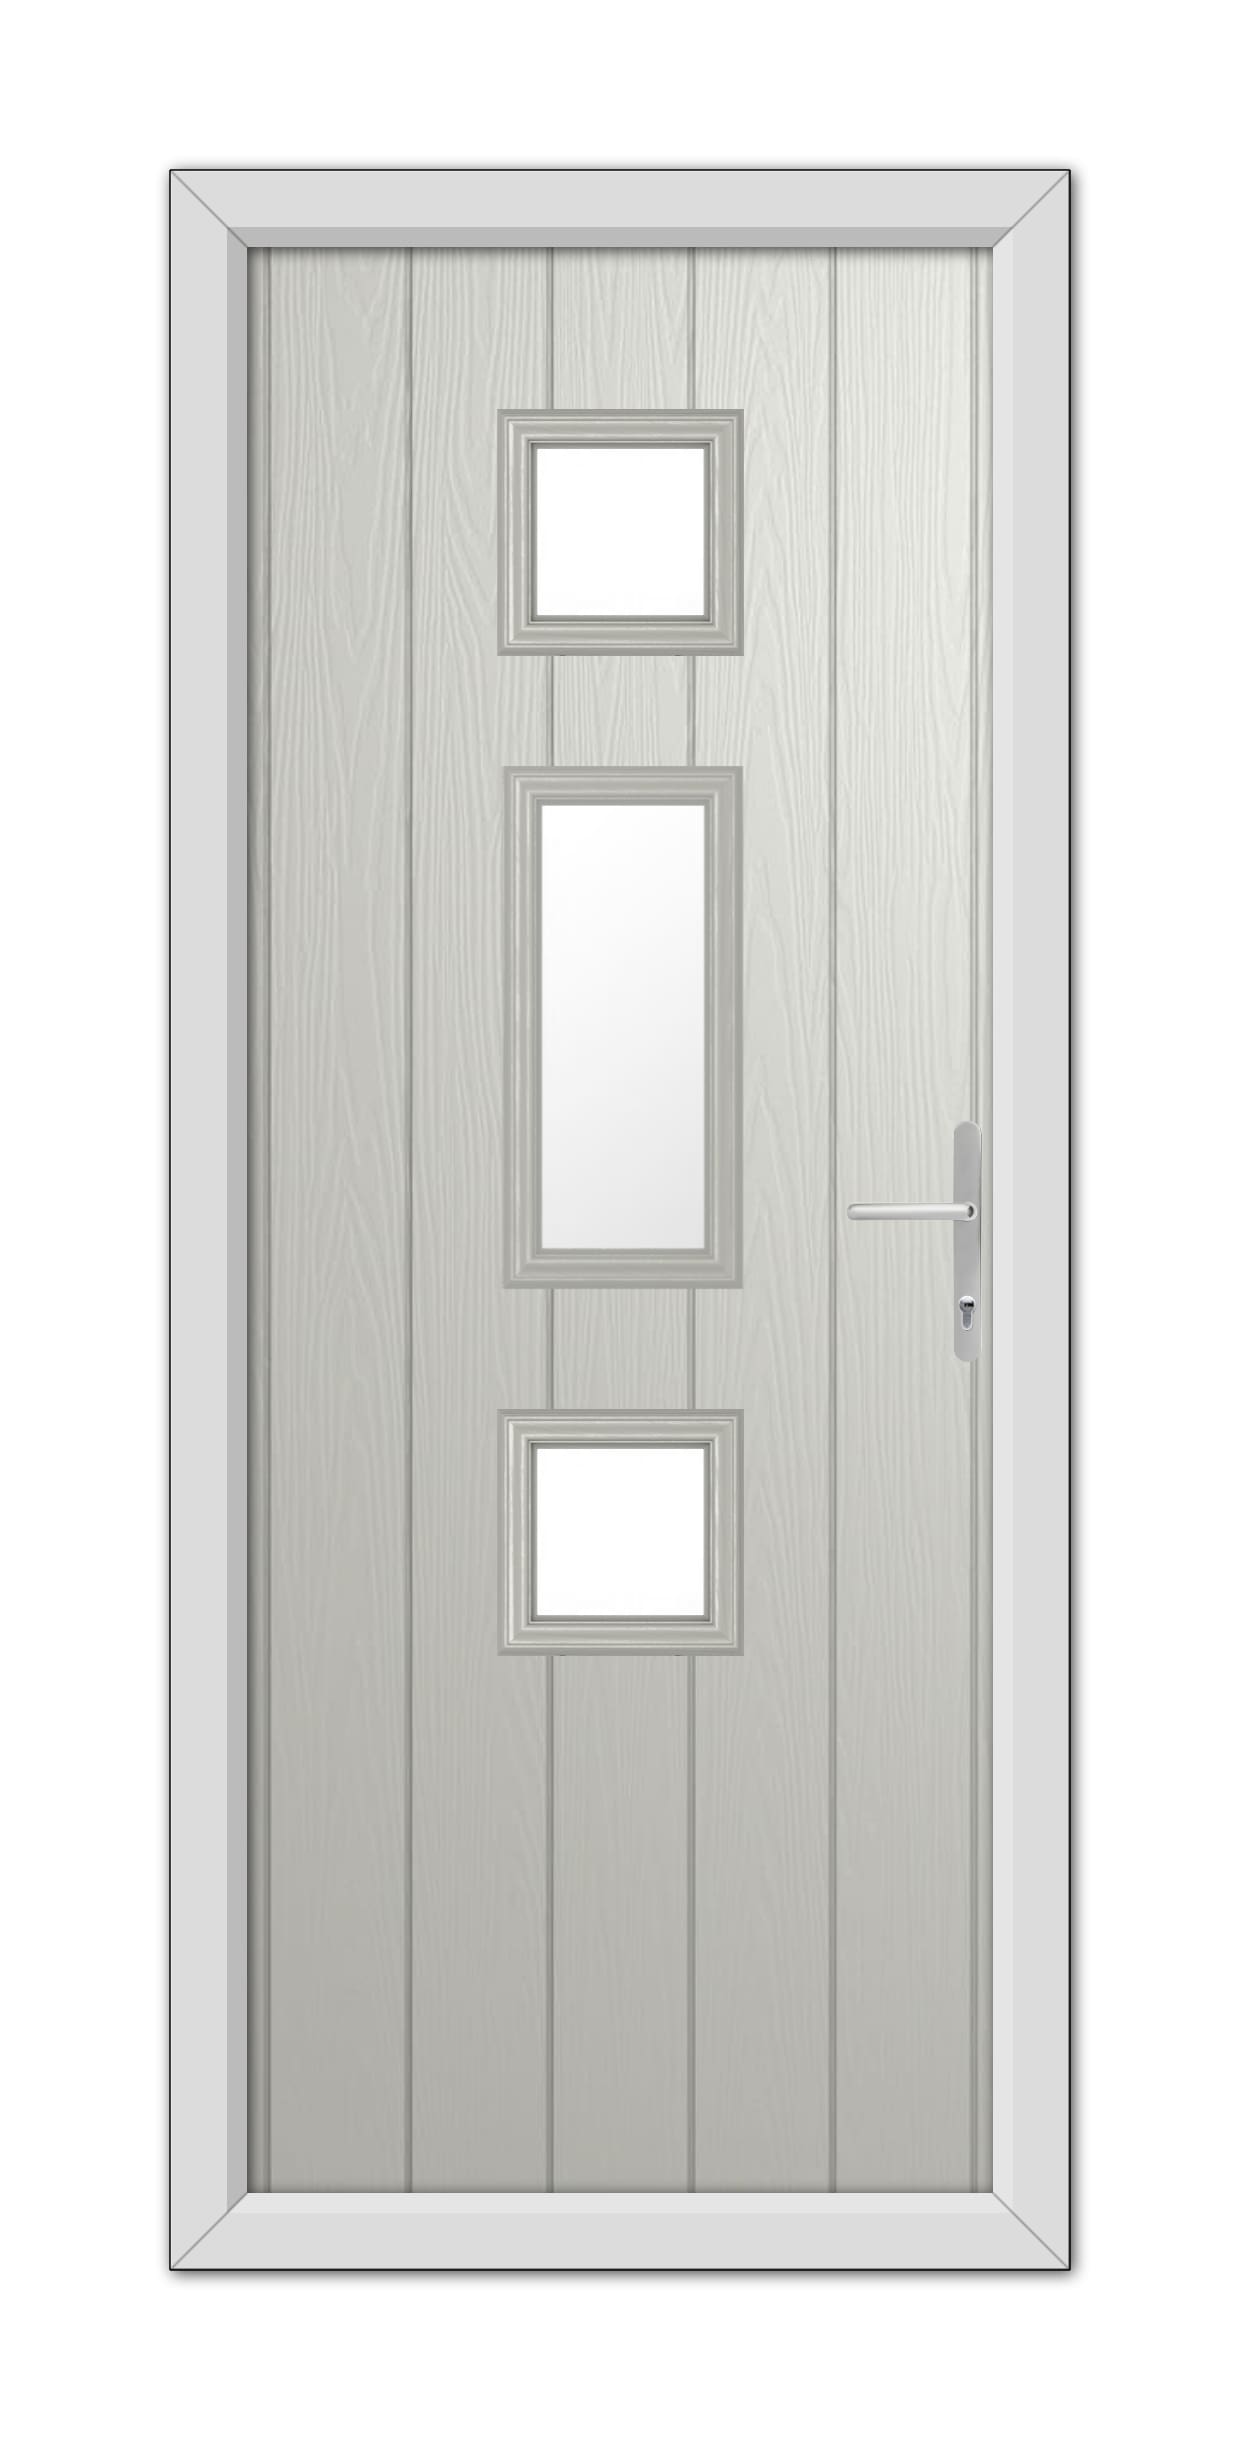 A modern Agate Grey York Composite Door 48mm Timber Core with three rectangular glass panels and a metal handle, set within a frame.